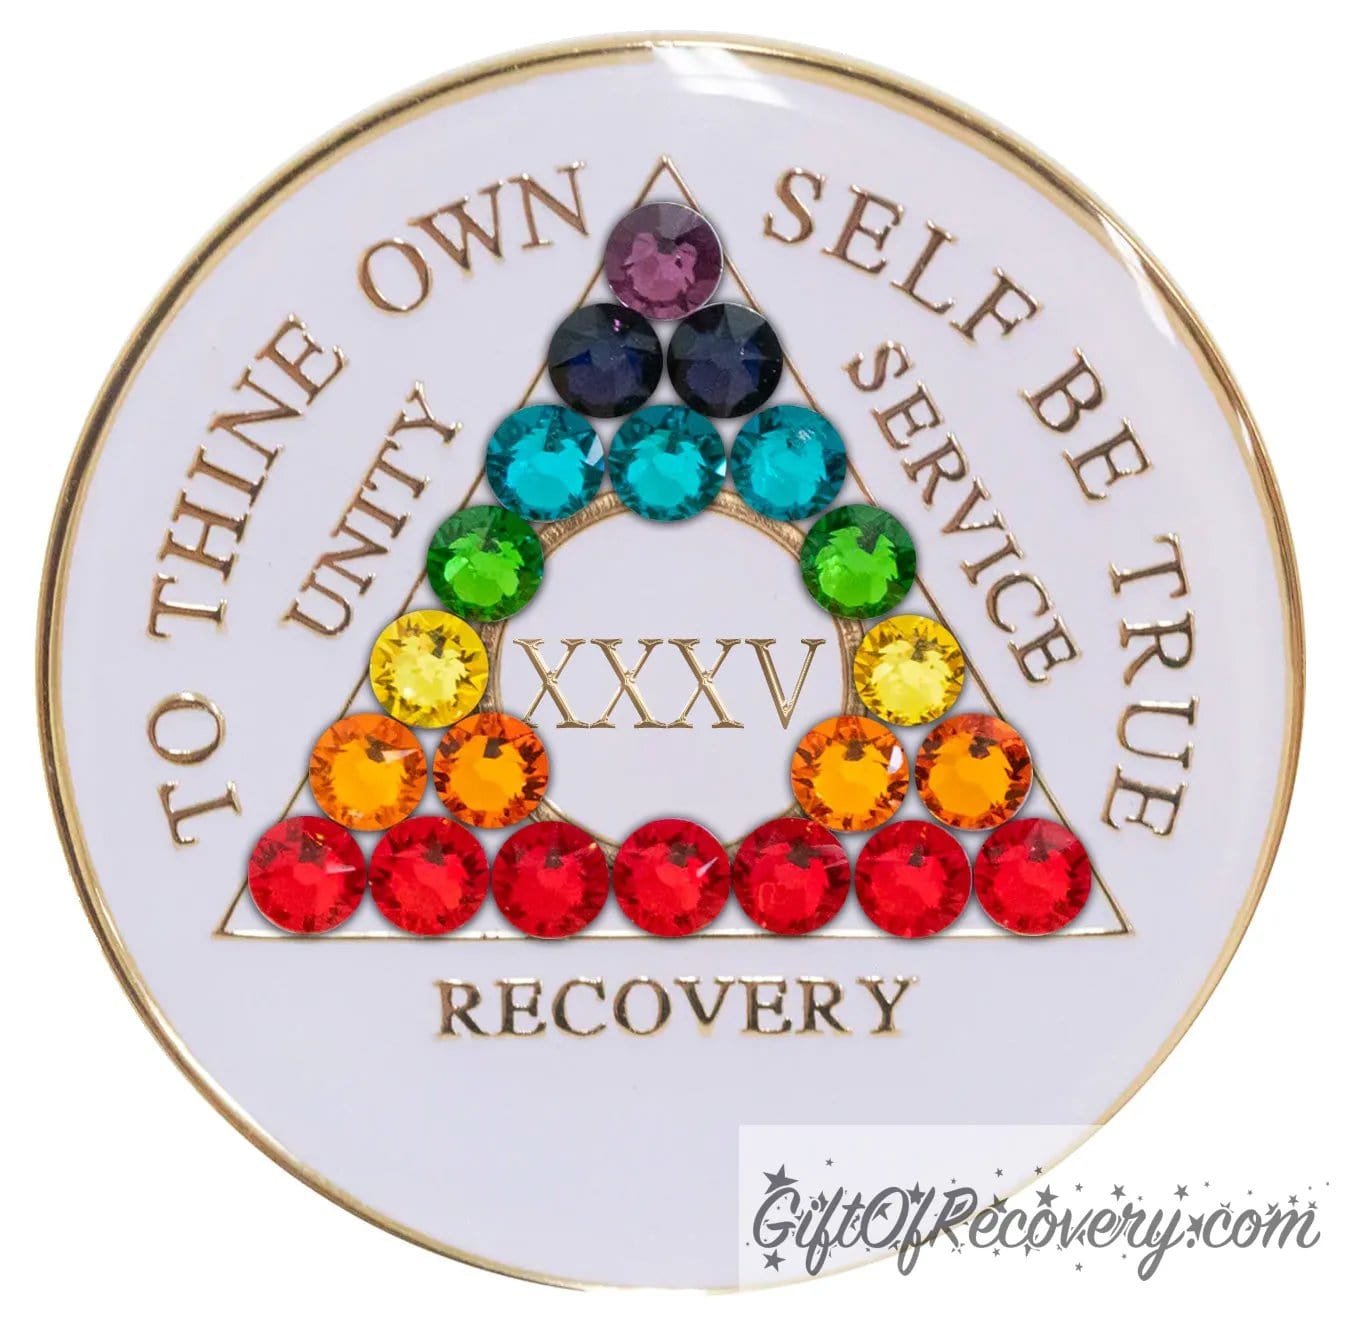 Sobriety Chip AA Chakra Bling Crystallized White Triplate 35 Years